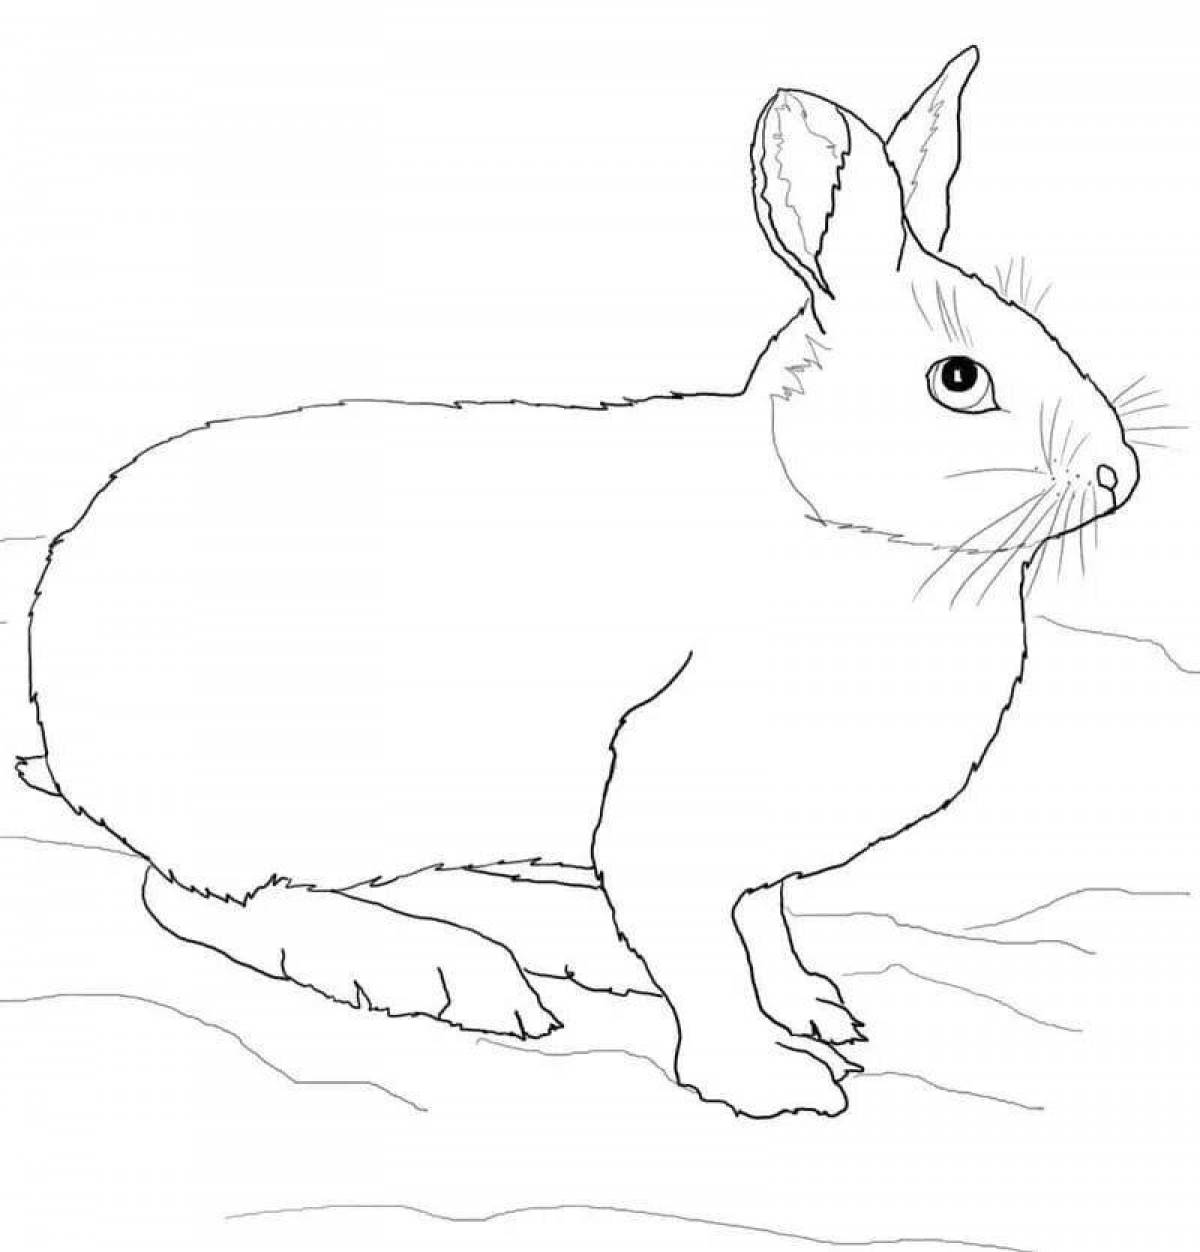 Sky white hare coloring page